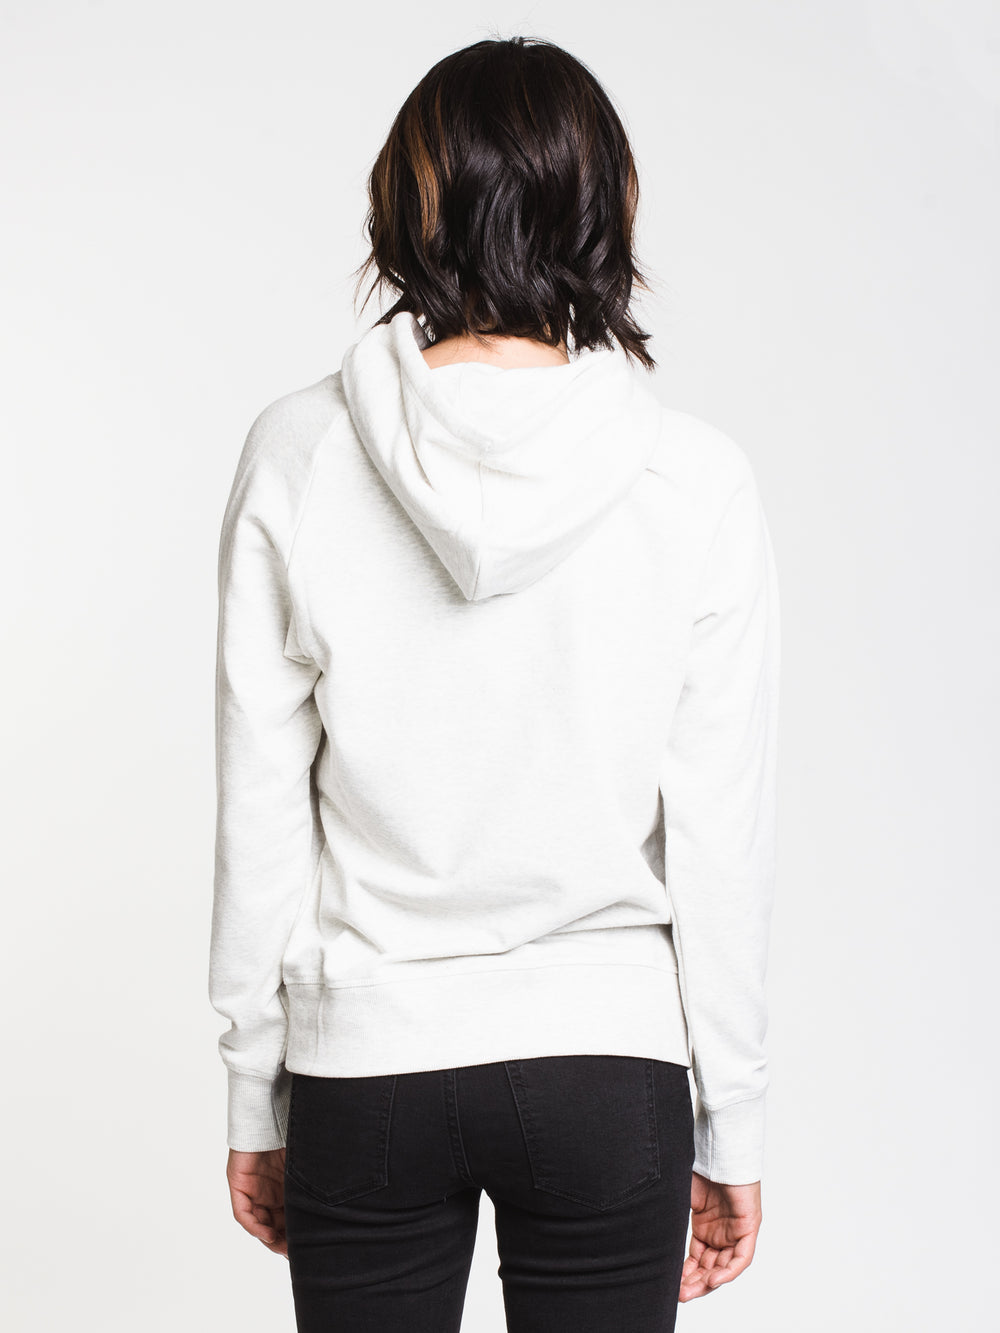 NEW BALANCE ESSENTIALSE PULLOVER HOODIE  - CLEARANCE